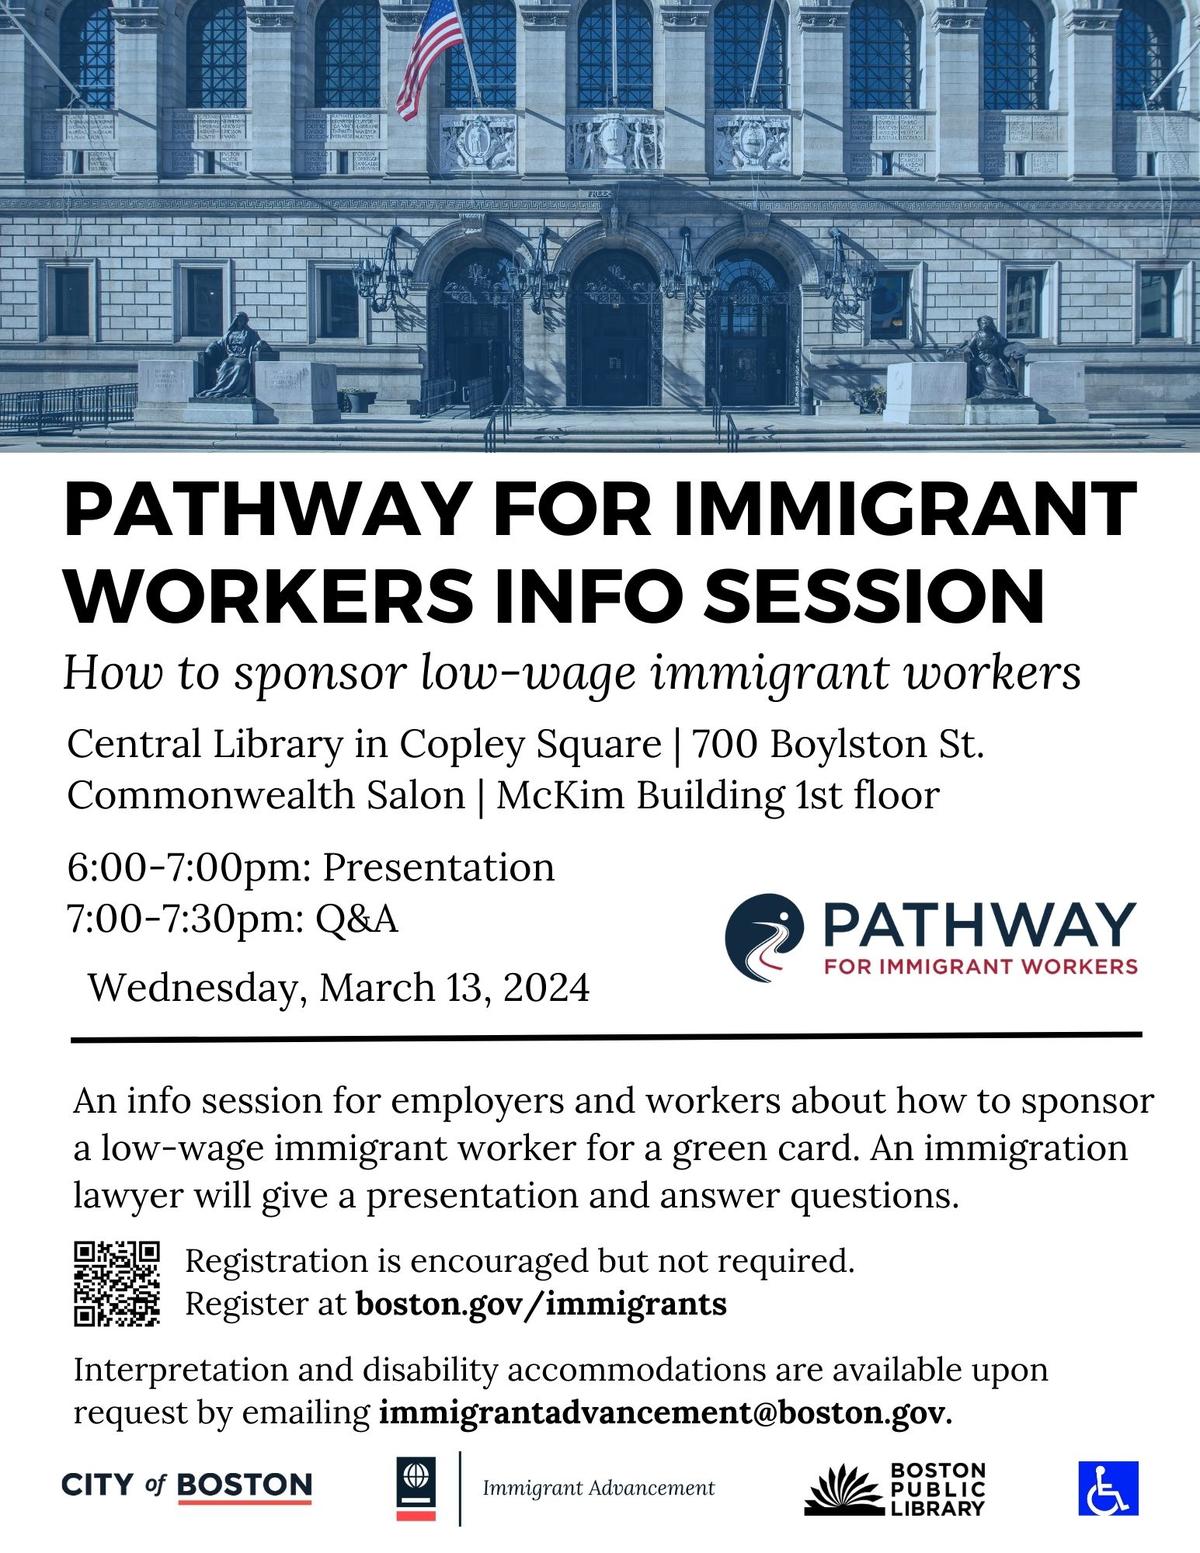 Flyer for an employer info session about how to sponsor low-wage immigrant workers. On Wednesday, March 13, 2023 from 6-7:30pm